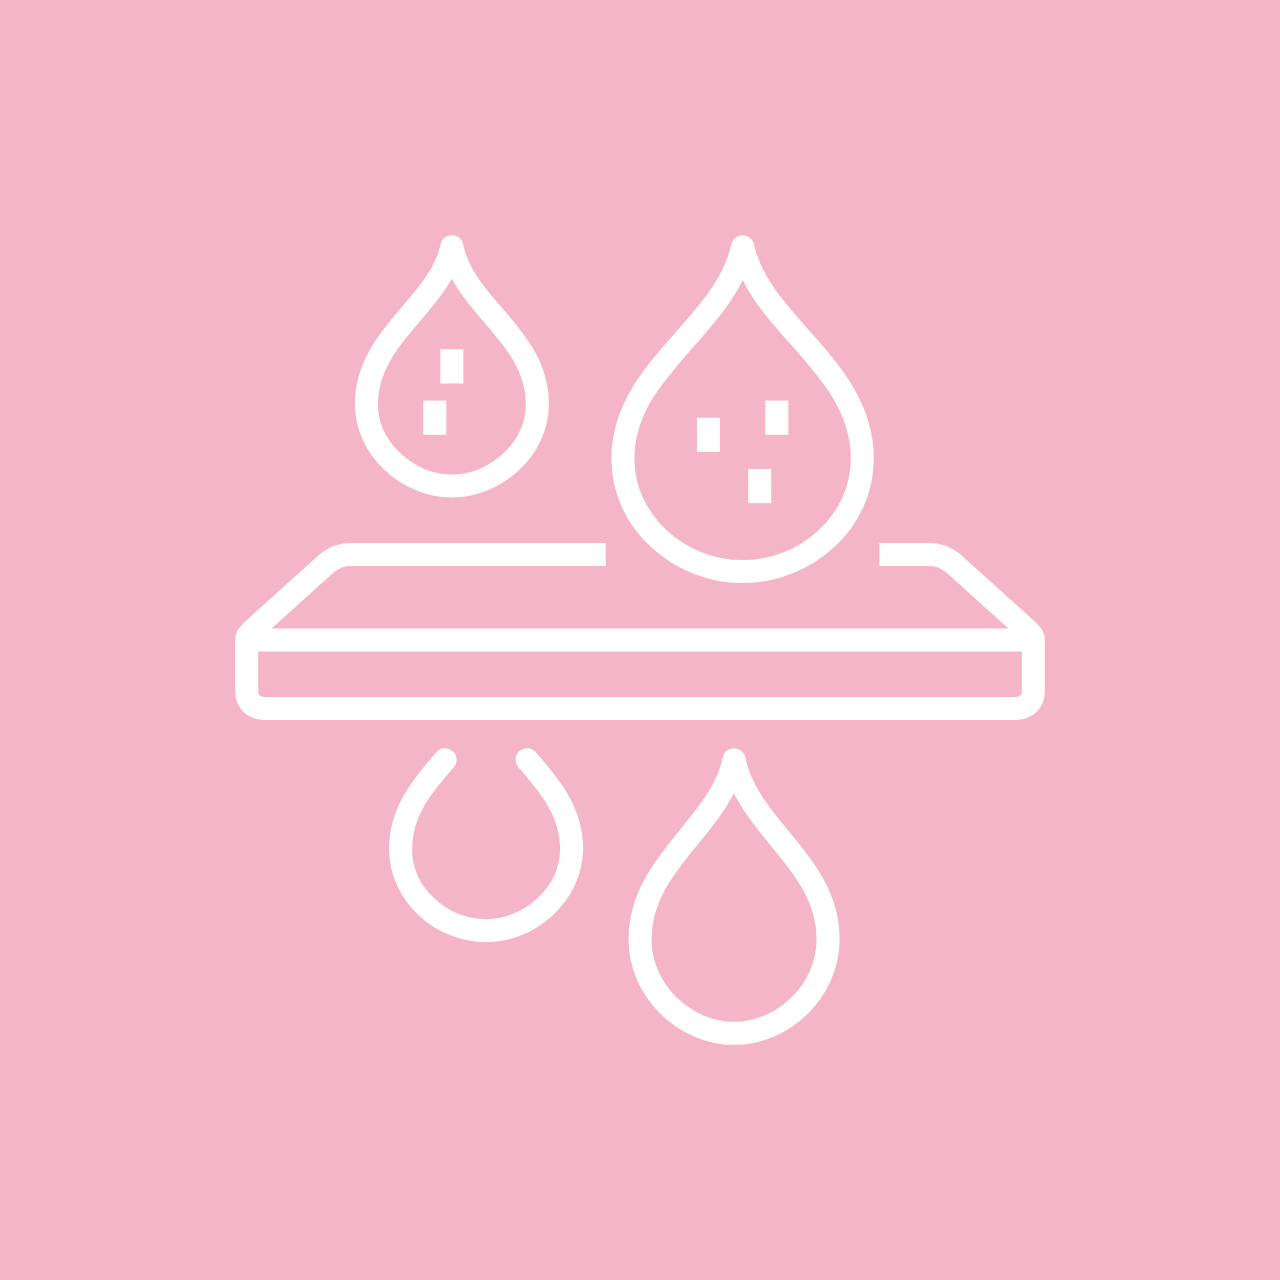 filtration_icon_bwt-pink_1280x1280.png